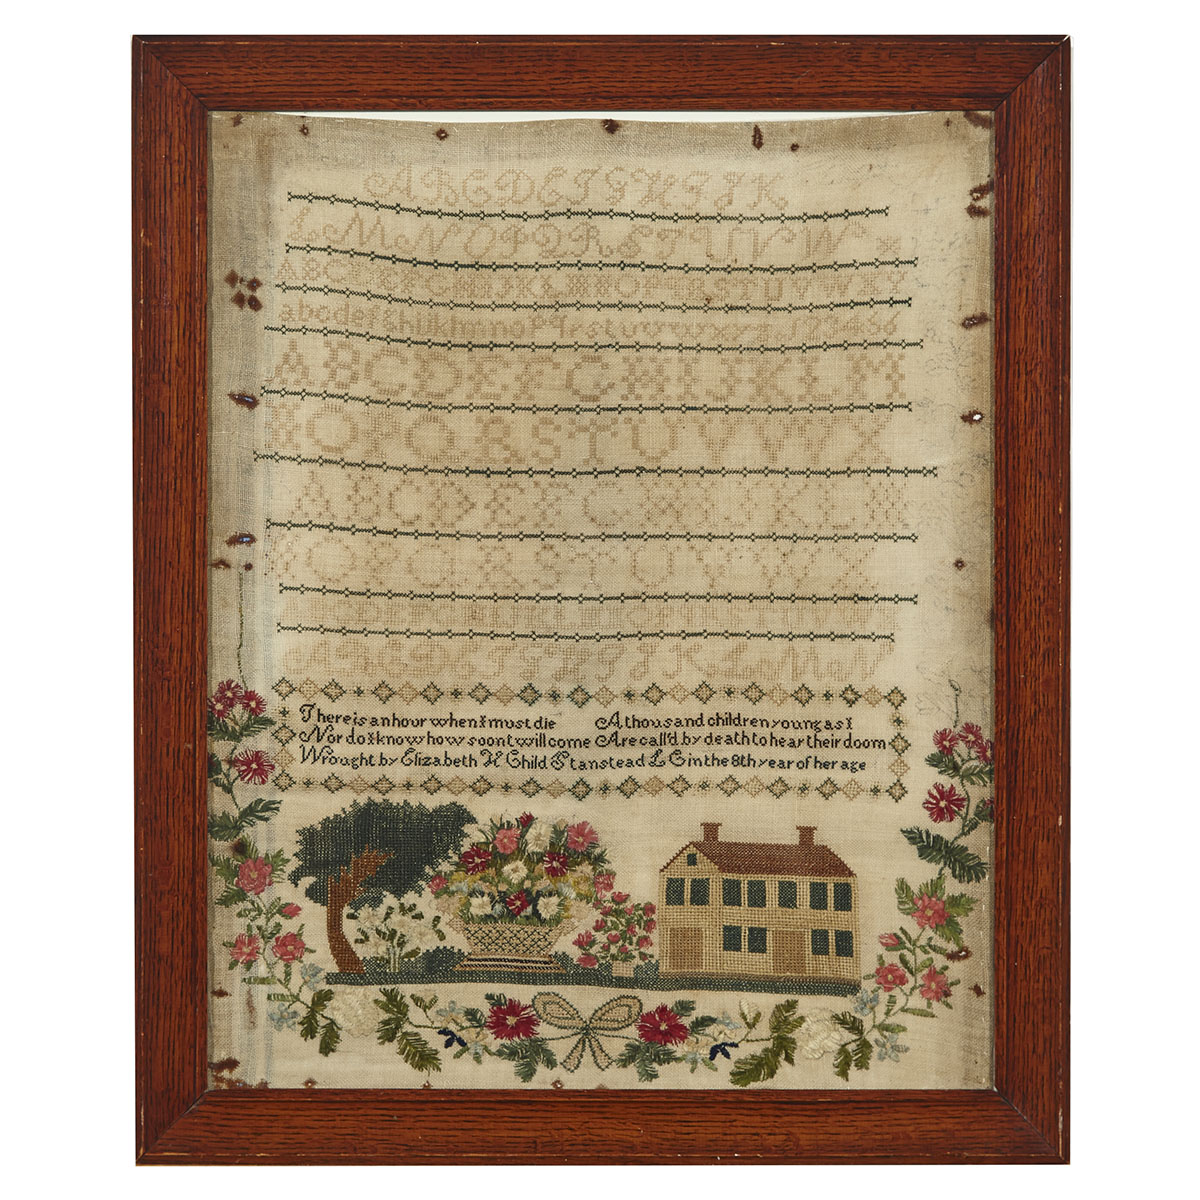 Early Quebec Alphabet, Verse and Pictorial Sampler, Elizabeth H. Child, in the 8th year of her age, Stanstead, L.C., early 19th century